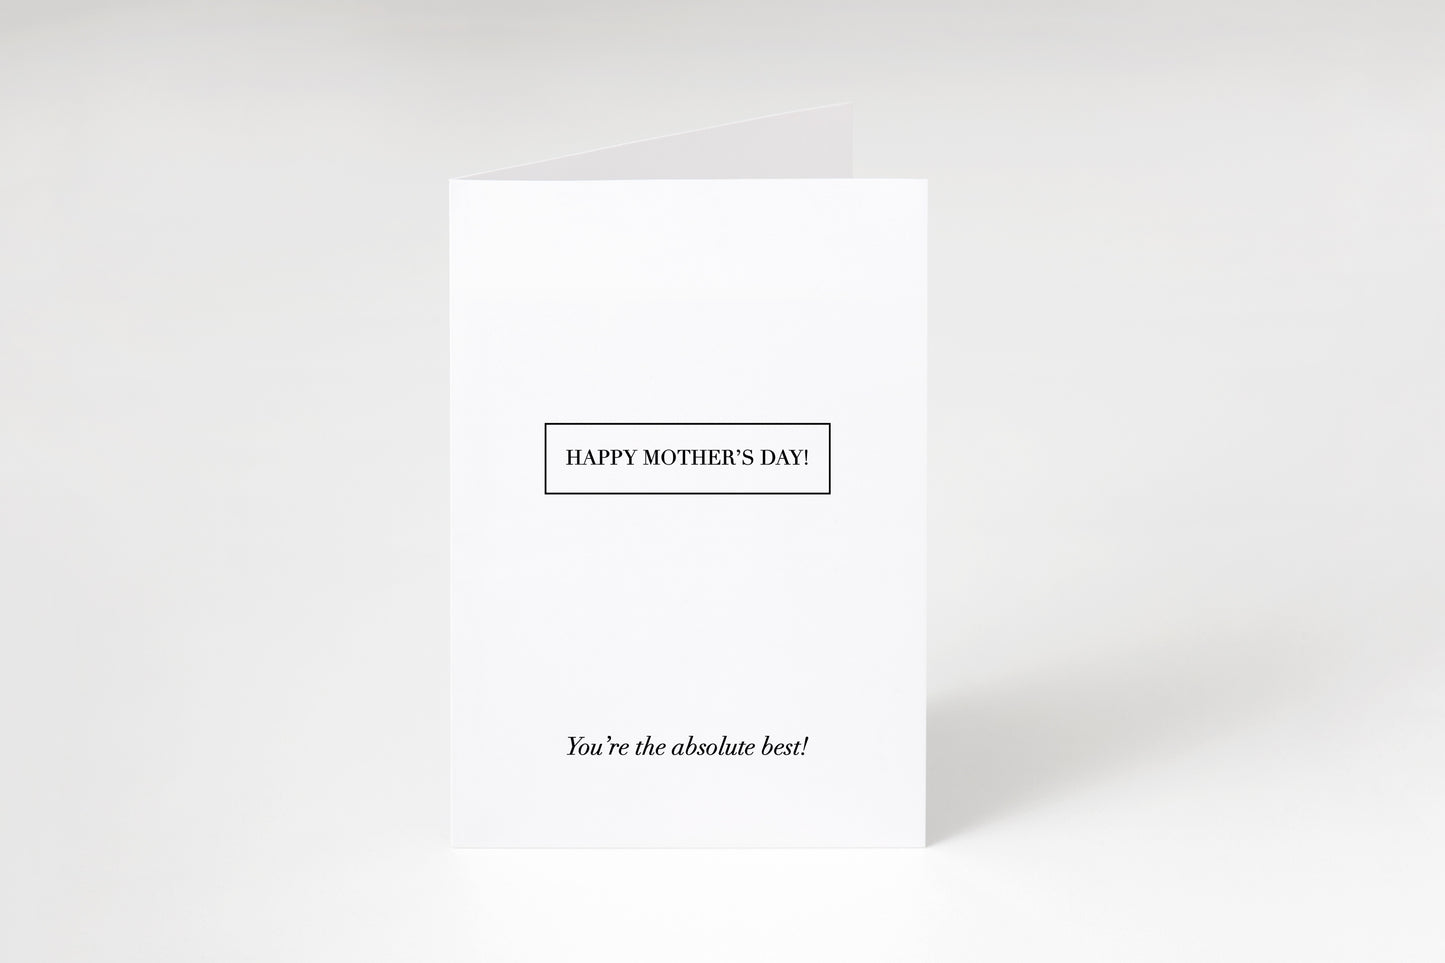 You’re the absolute best,Mother’s Day card,Card for Mother,Happy Mother’s Day,Card for Mom,Card for her,Card for friend,For Mom,For Mother